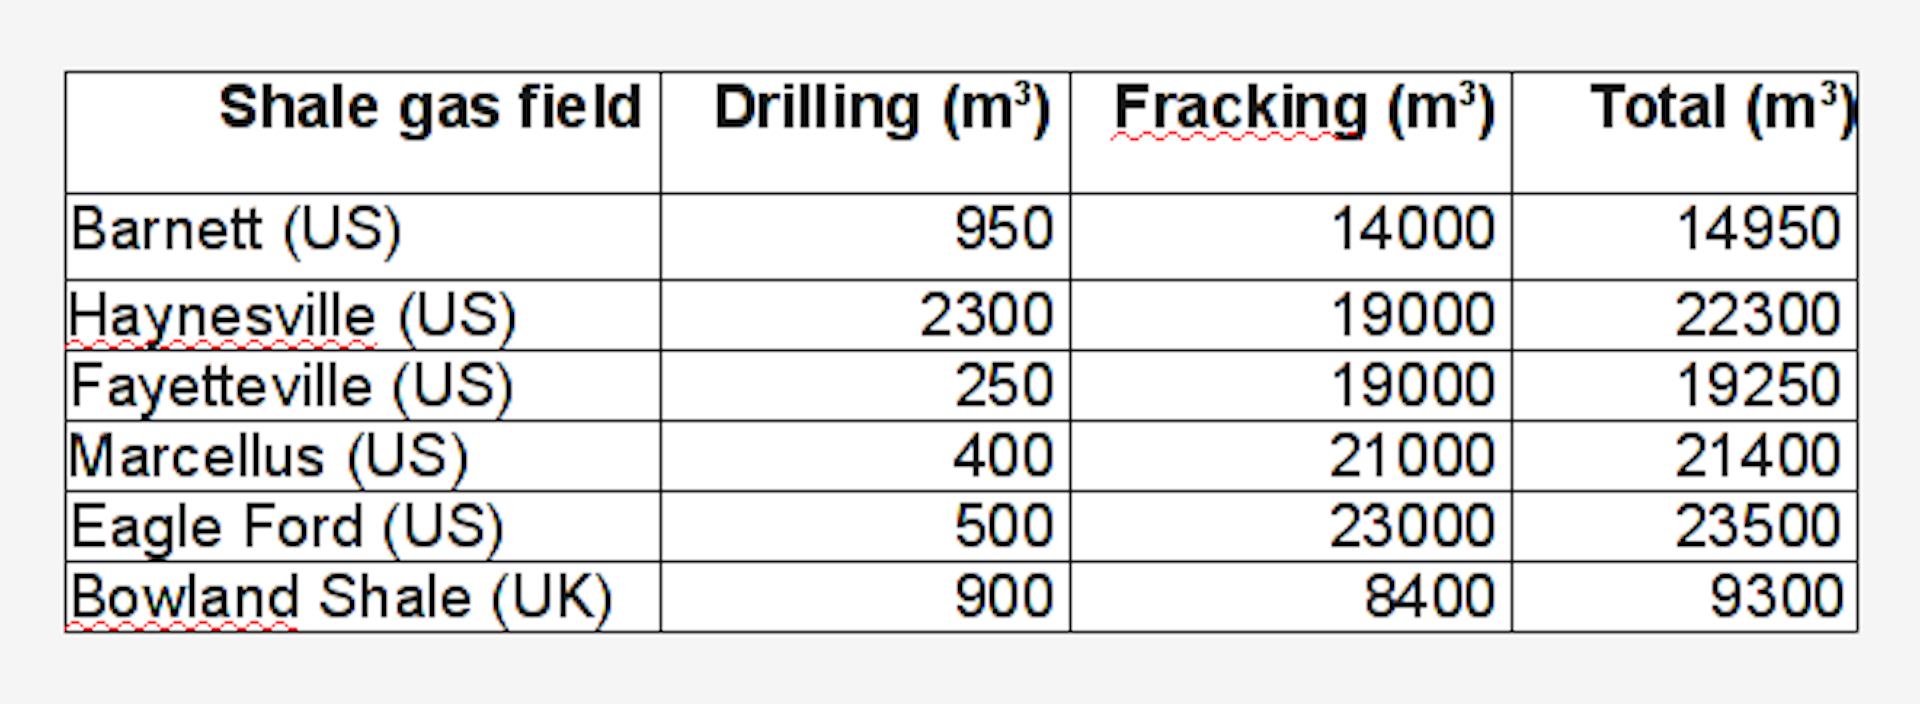 number of fracked wells in the us